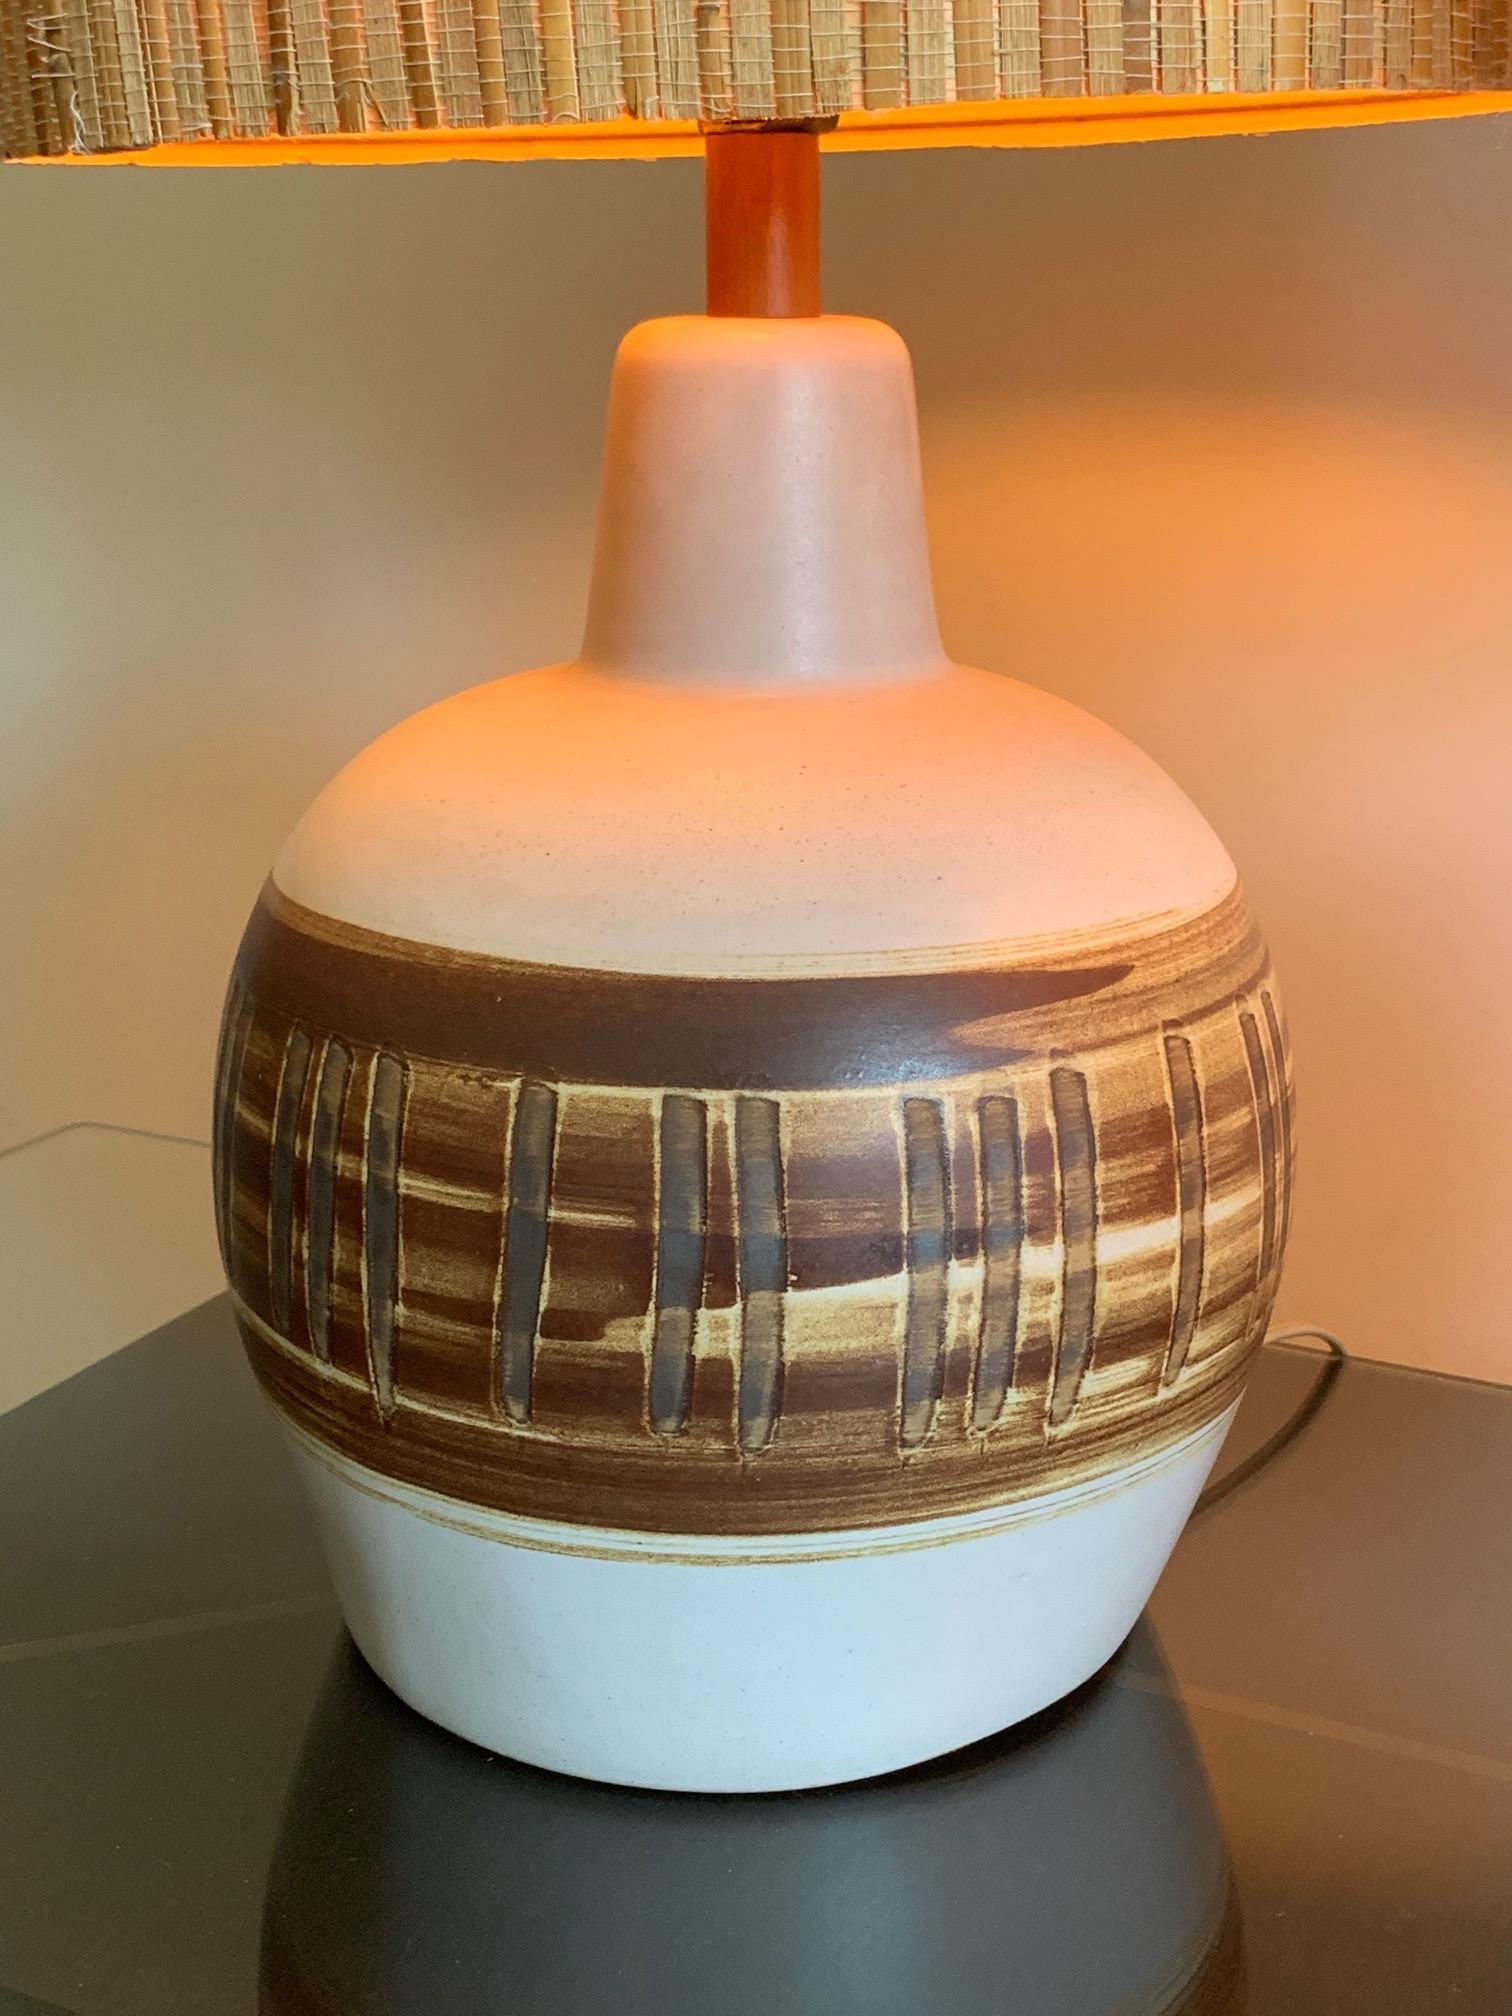 A pair of unusual ceramic lamps by Gordon Martz for Marshall studios decorated with vertical lines.